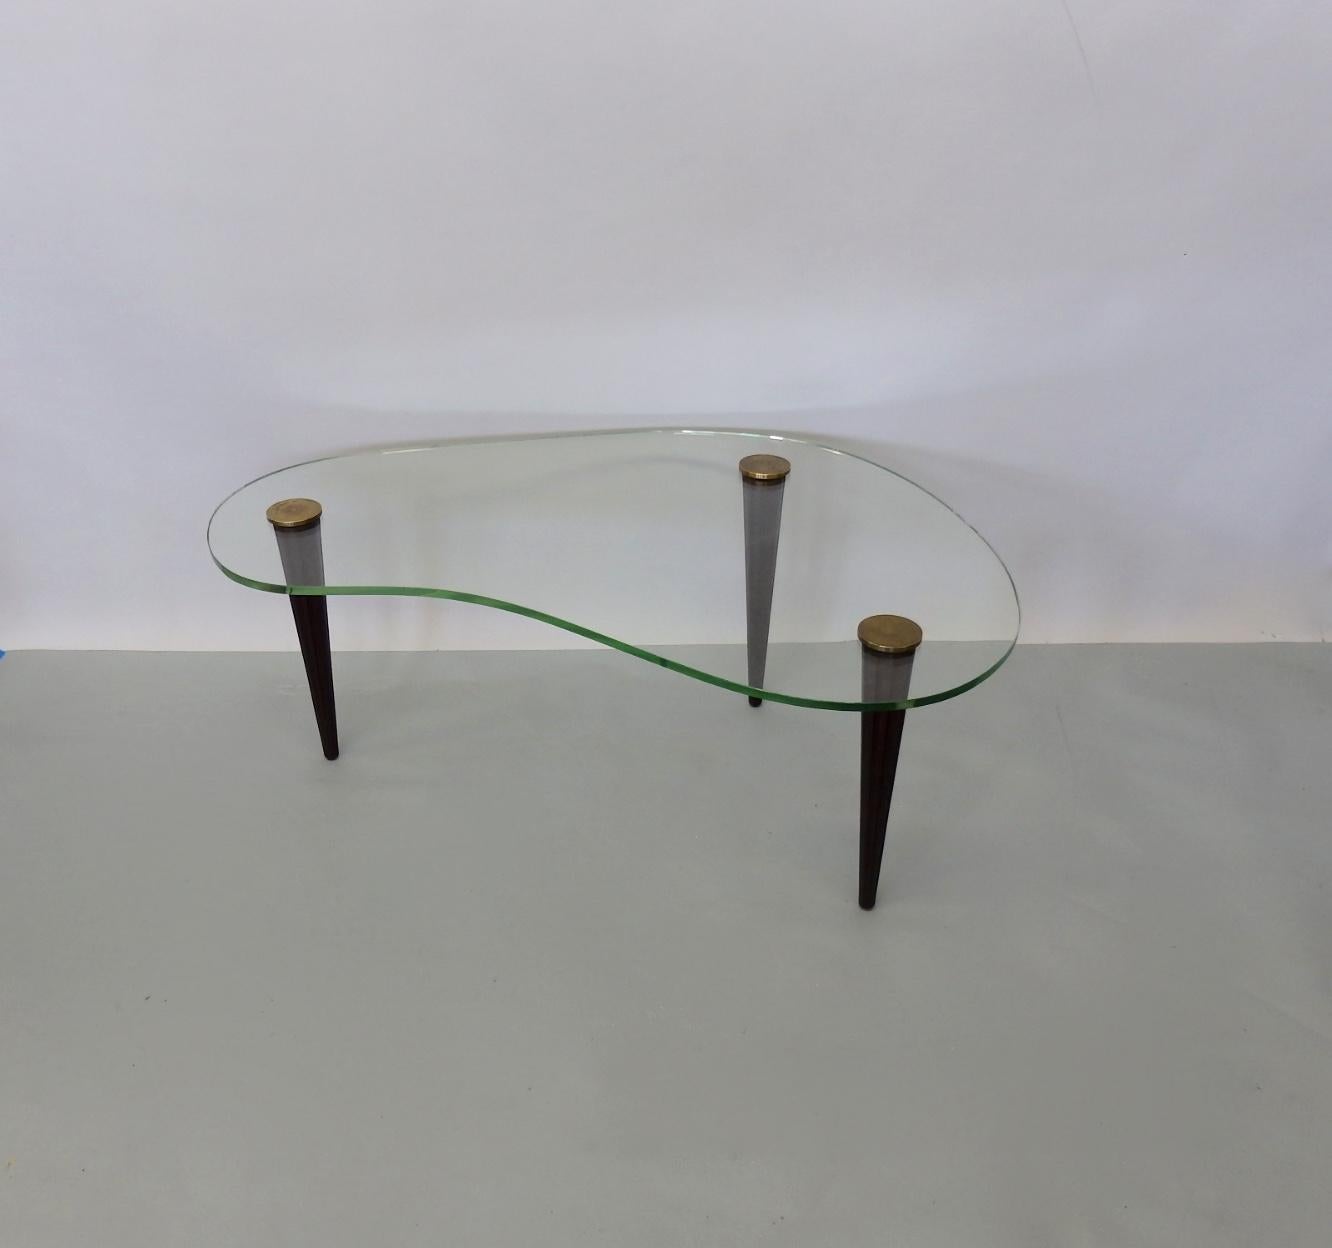 20th Century Gilbert Rohde Style Art Deco Floating Glass Cloud Coffee Table